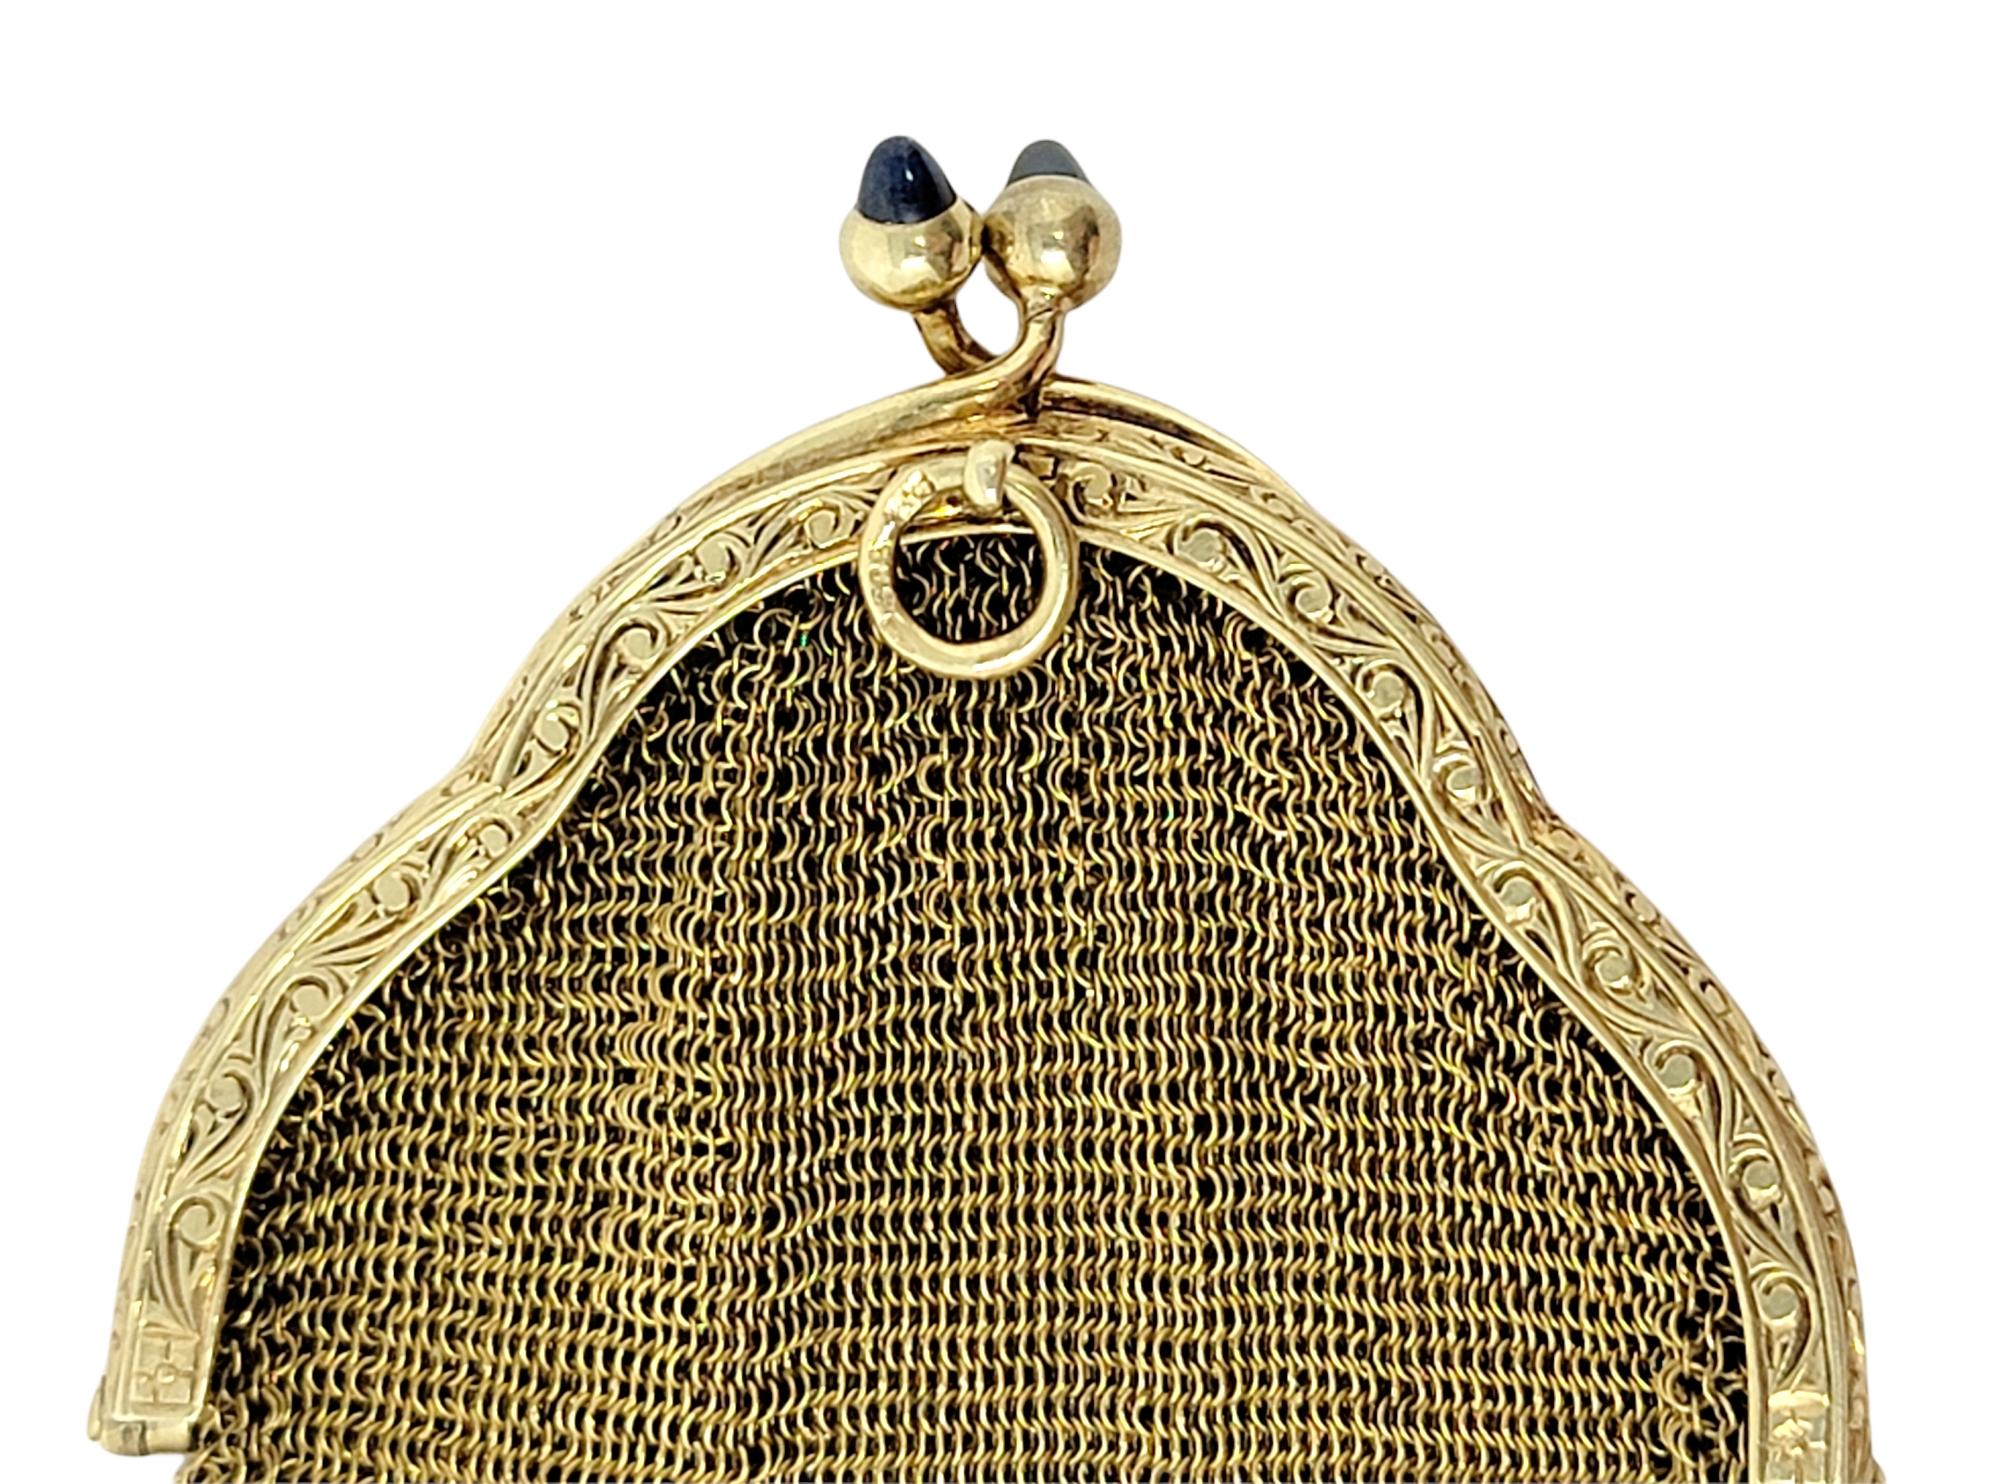 Exquisite 14 karat yellow gold flapper purse. This gorgeous and unique Art Deco piece is composed of delicate woven 14 karat yellow gold mesh accented by 2 grayish-blue sapphire cabochons at the kiss lock clasp. Note this is a small coin purse size.